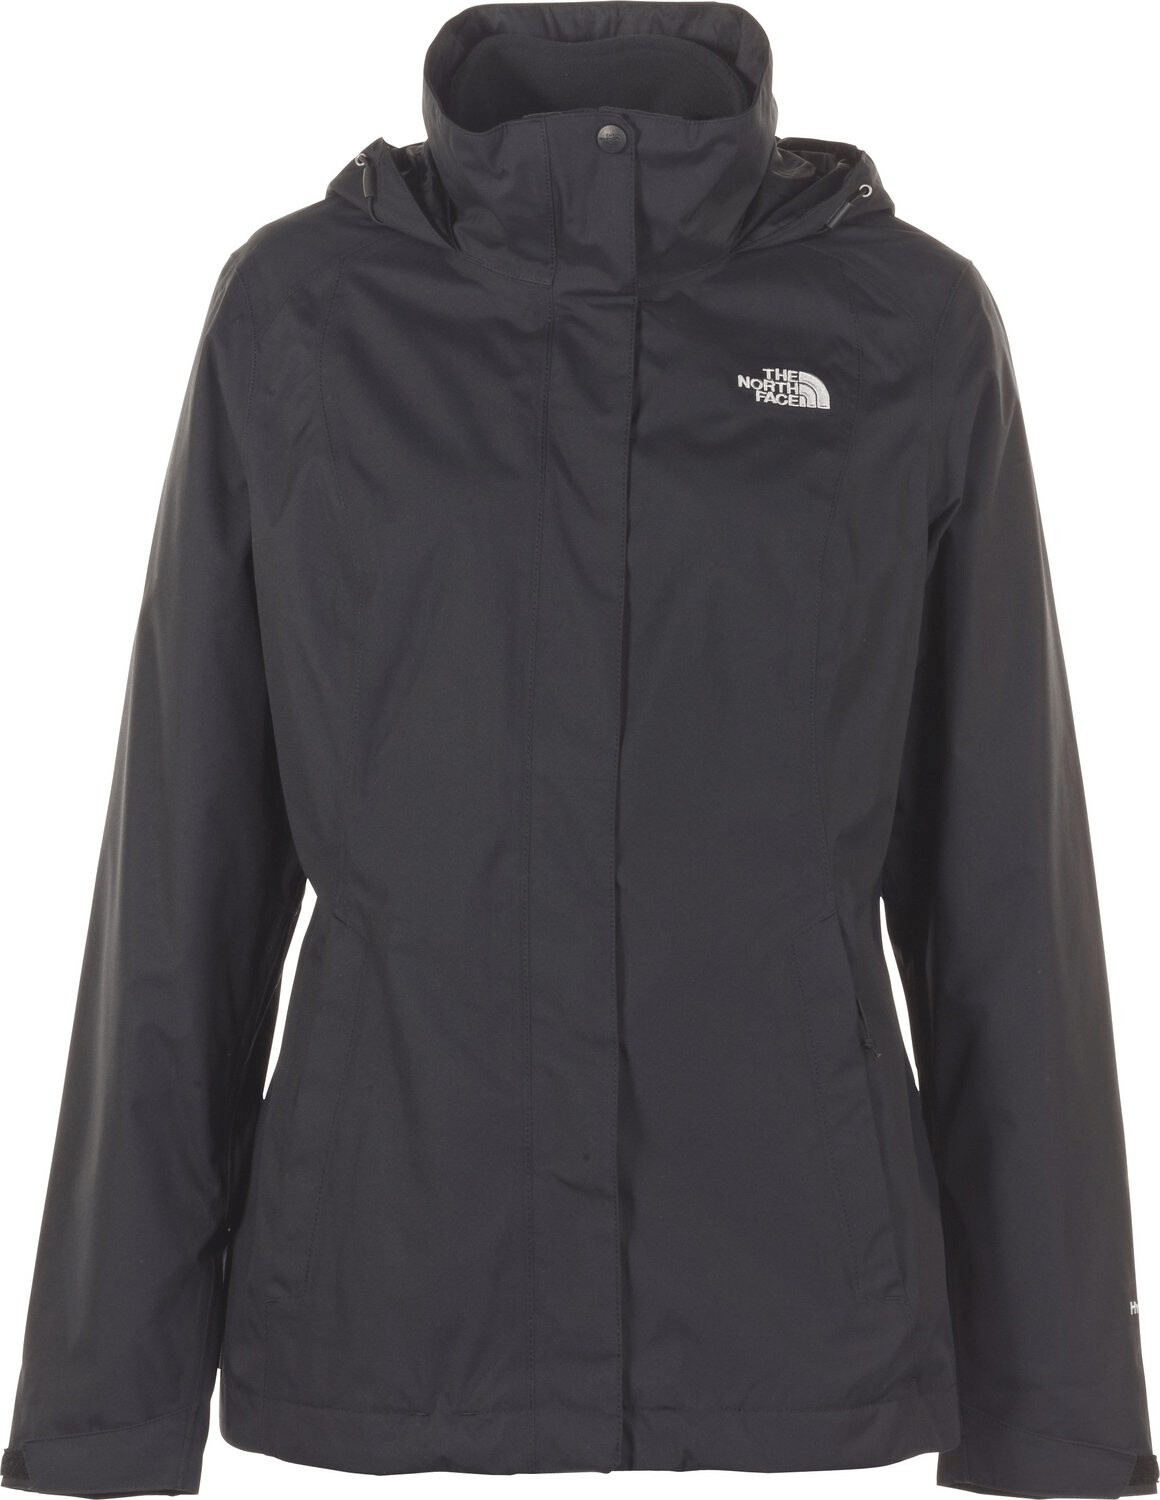 Buy The North Face Women's Evolve II Triclimate Jacket TNF Black from £ ...